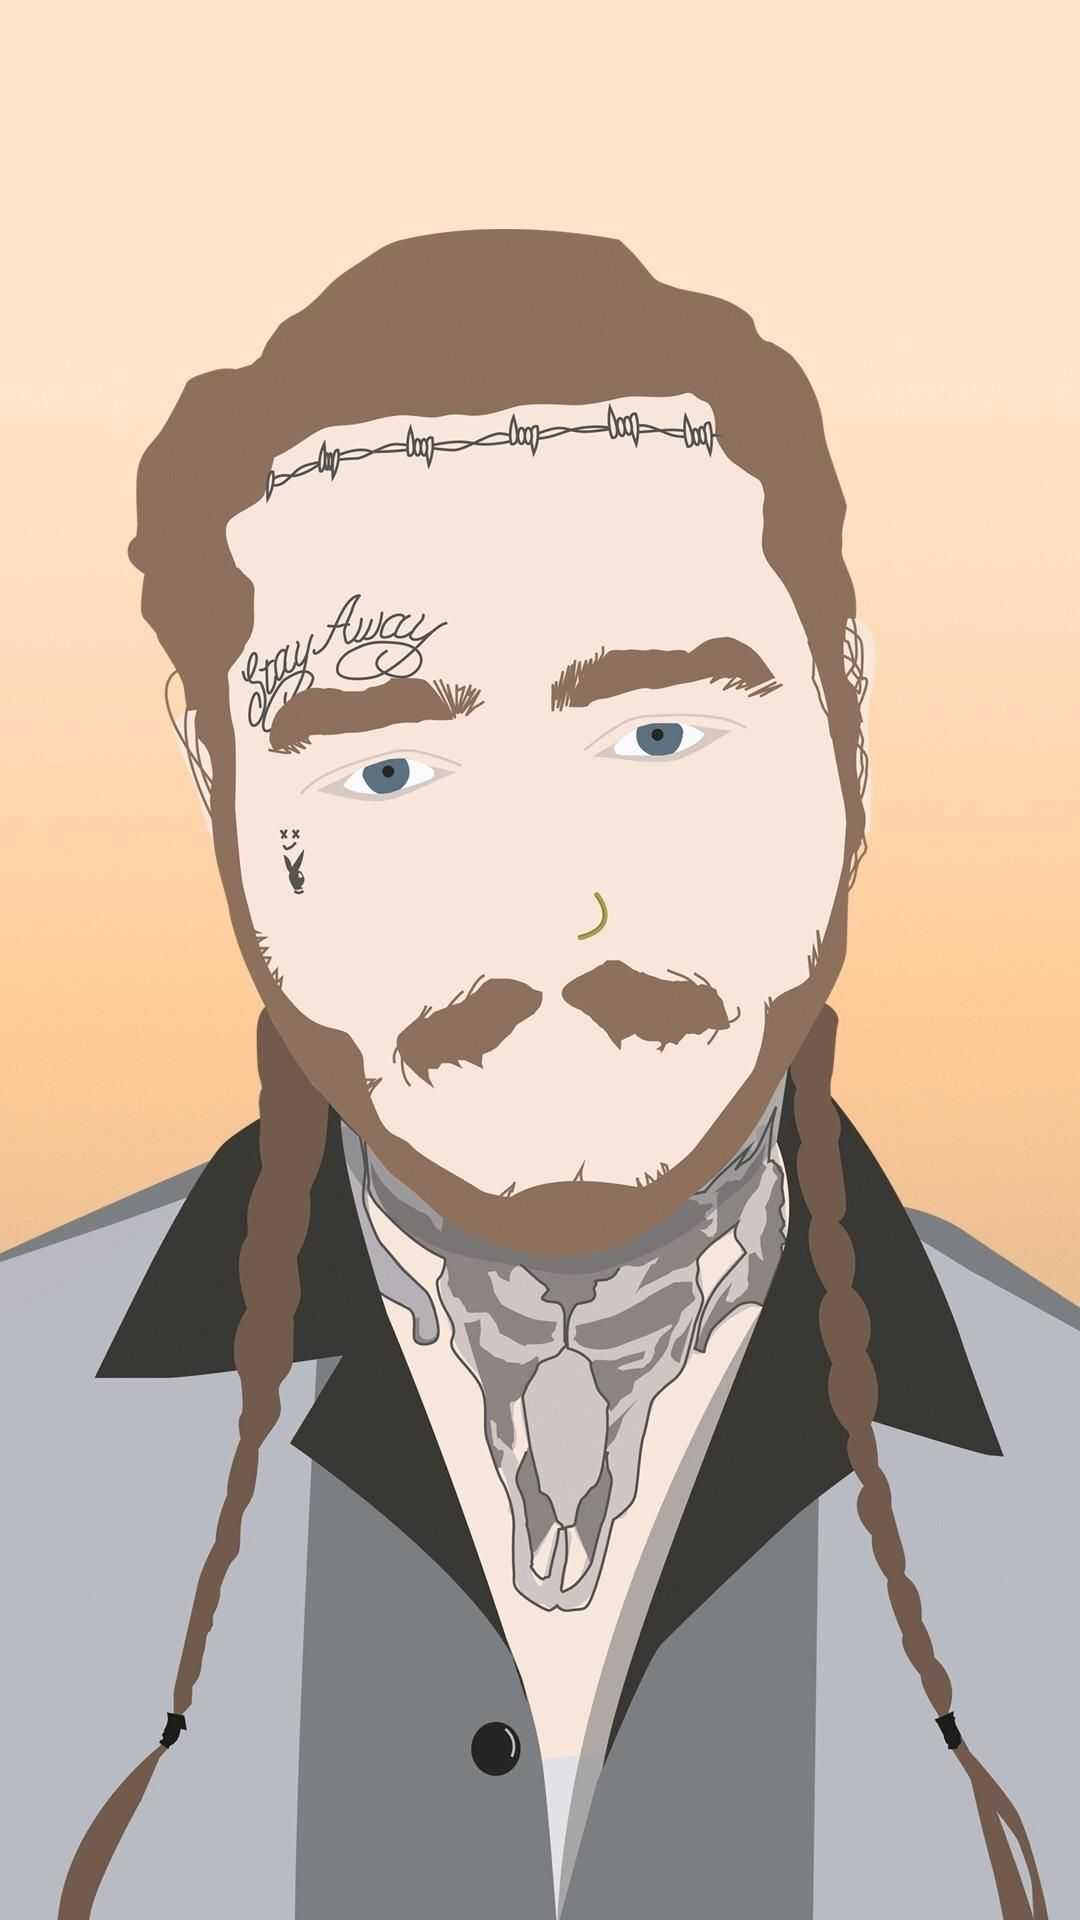 iPhone Post Malone Wallpaper - KoLPaPer - Awesome Free HD Wallpapers